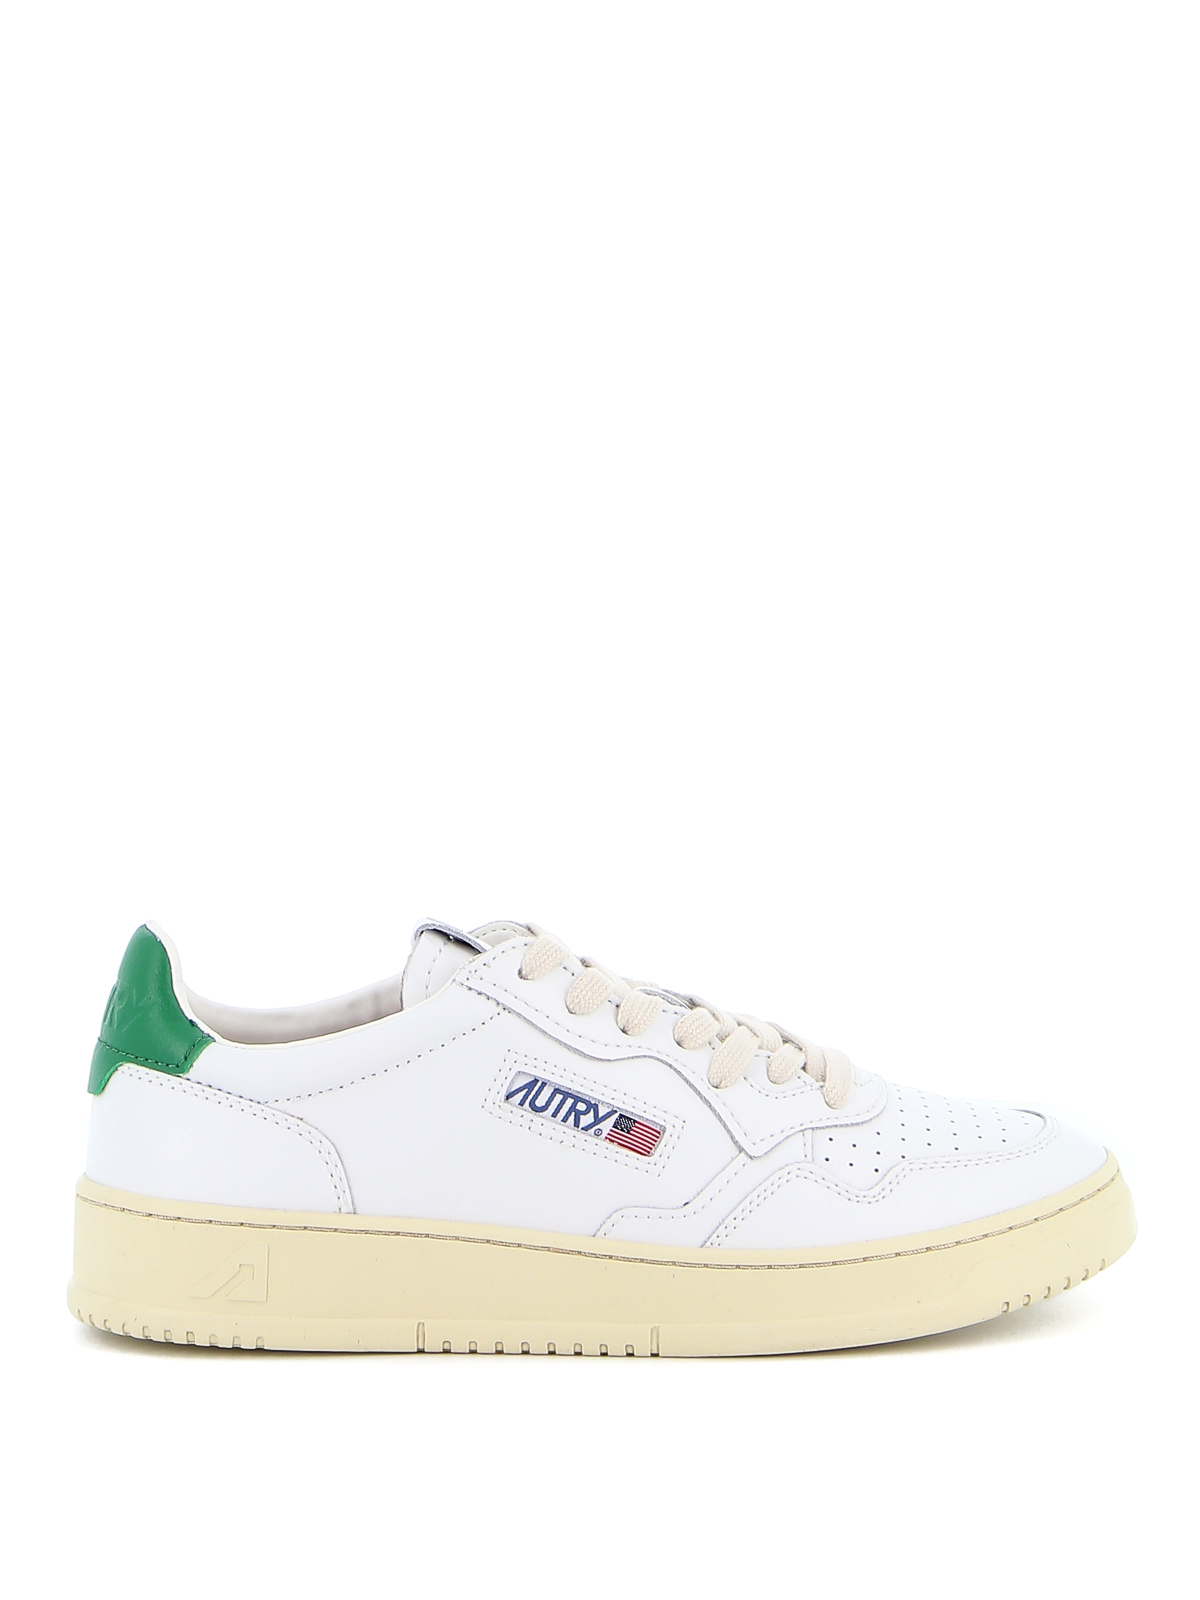 Autry - Medalist sneakers - trainers - AULMLL20 | Shop online at iKRIX